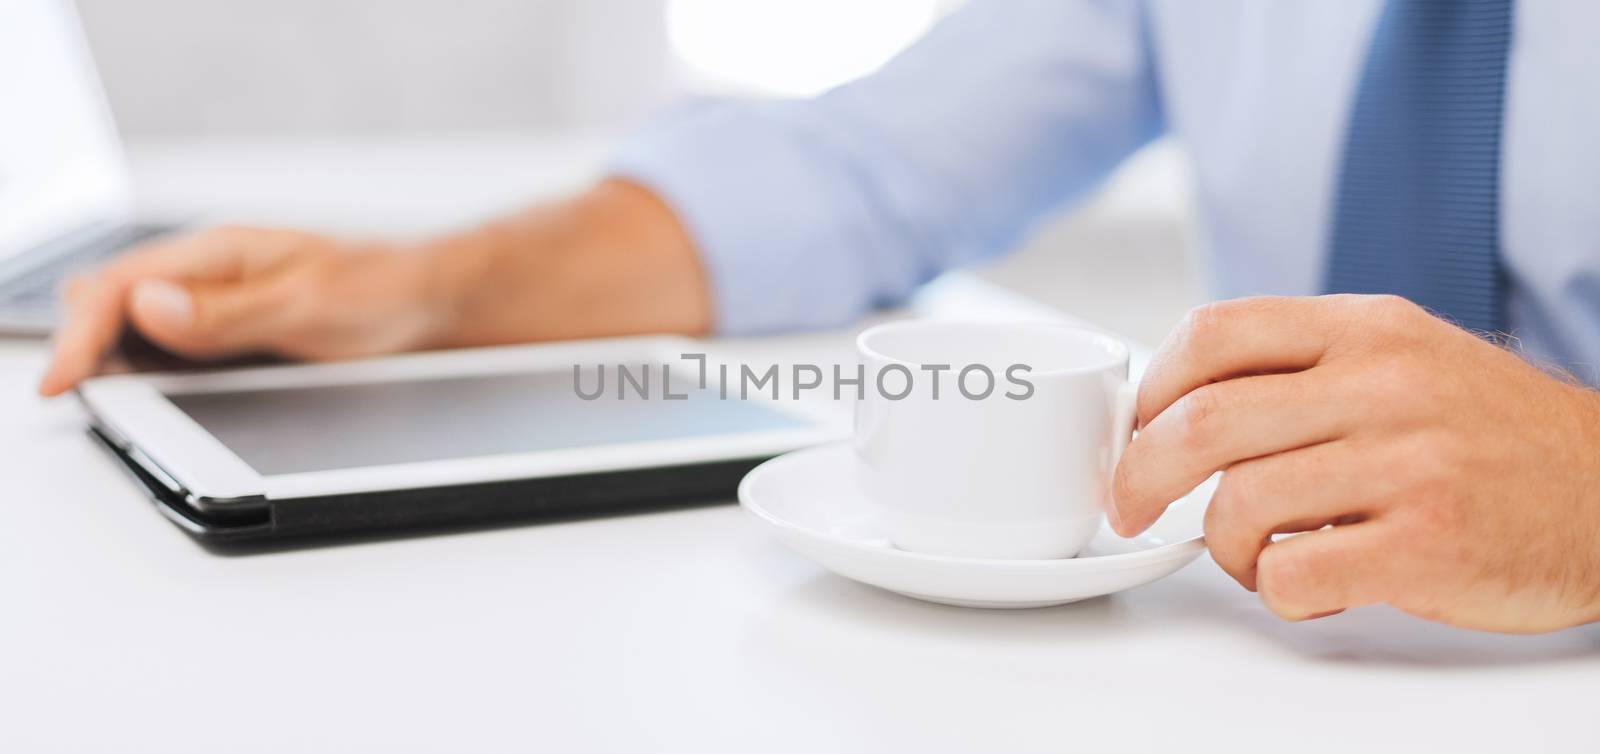 business, office, school and education concept - businessman with tablet pc drinking coffee in office